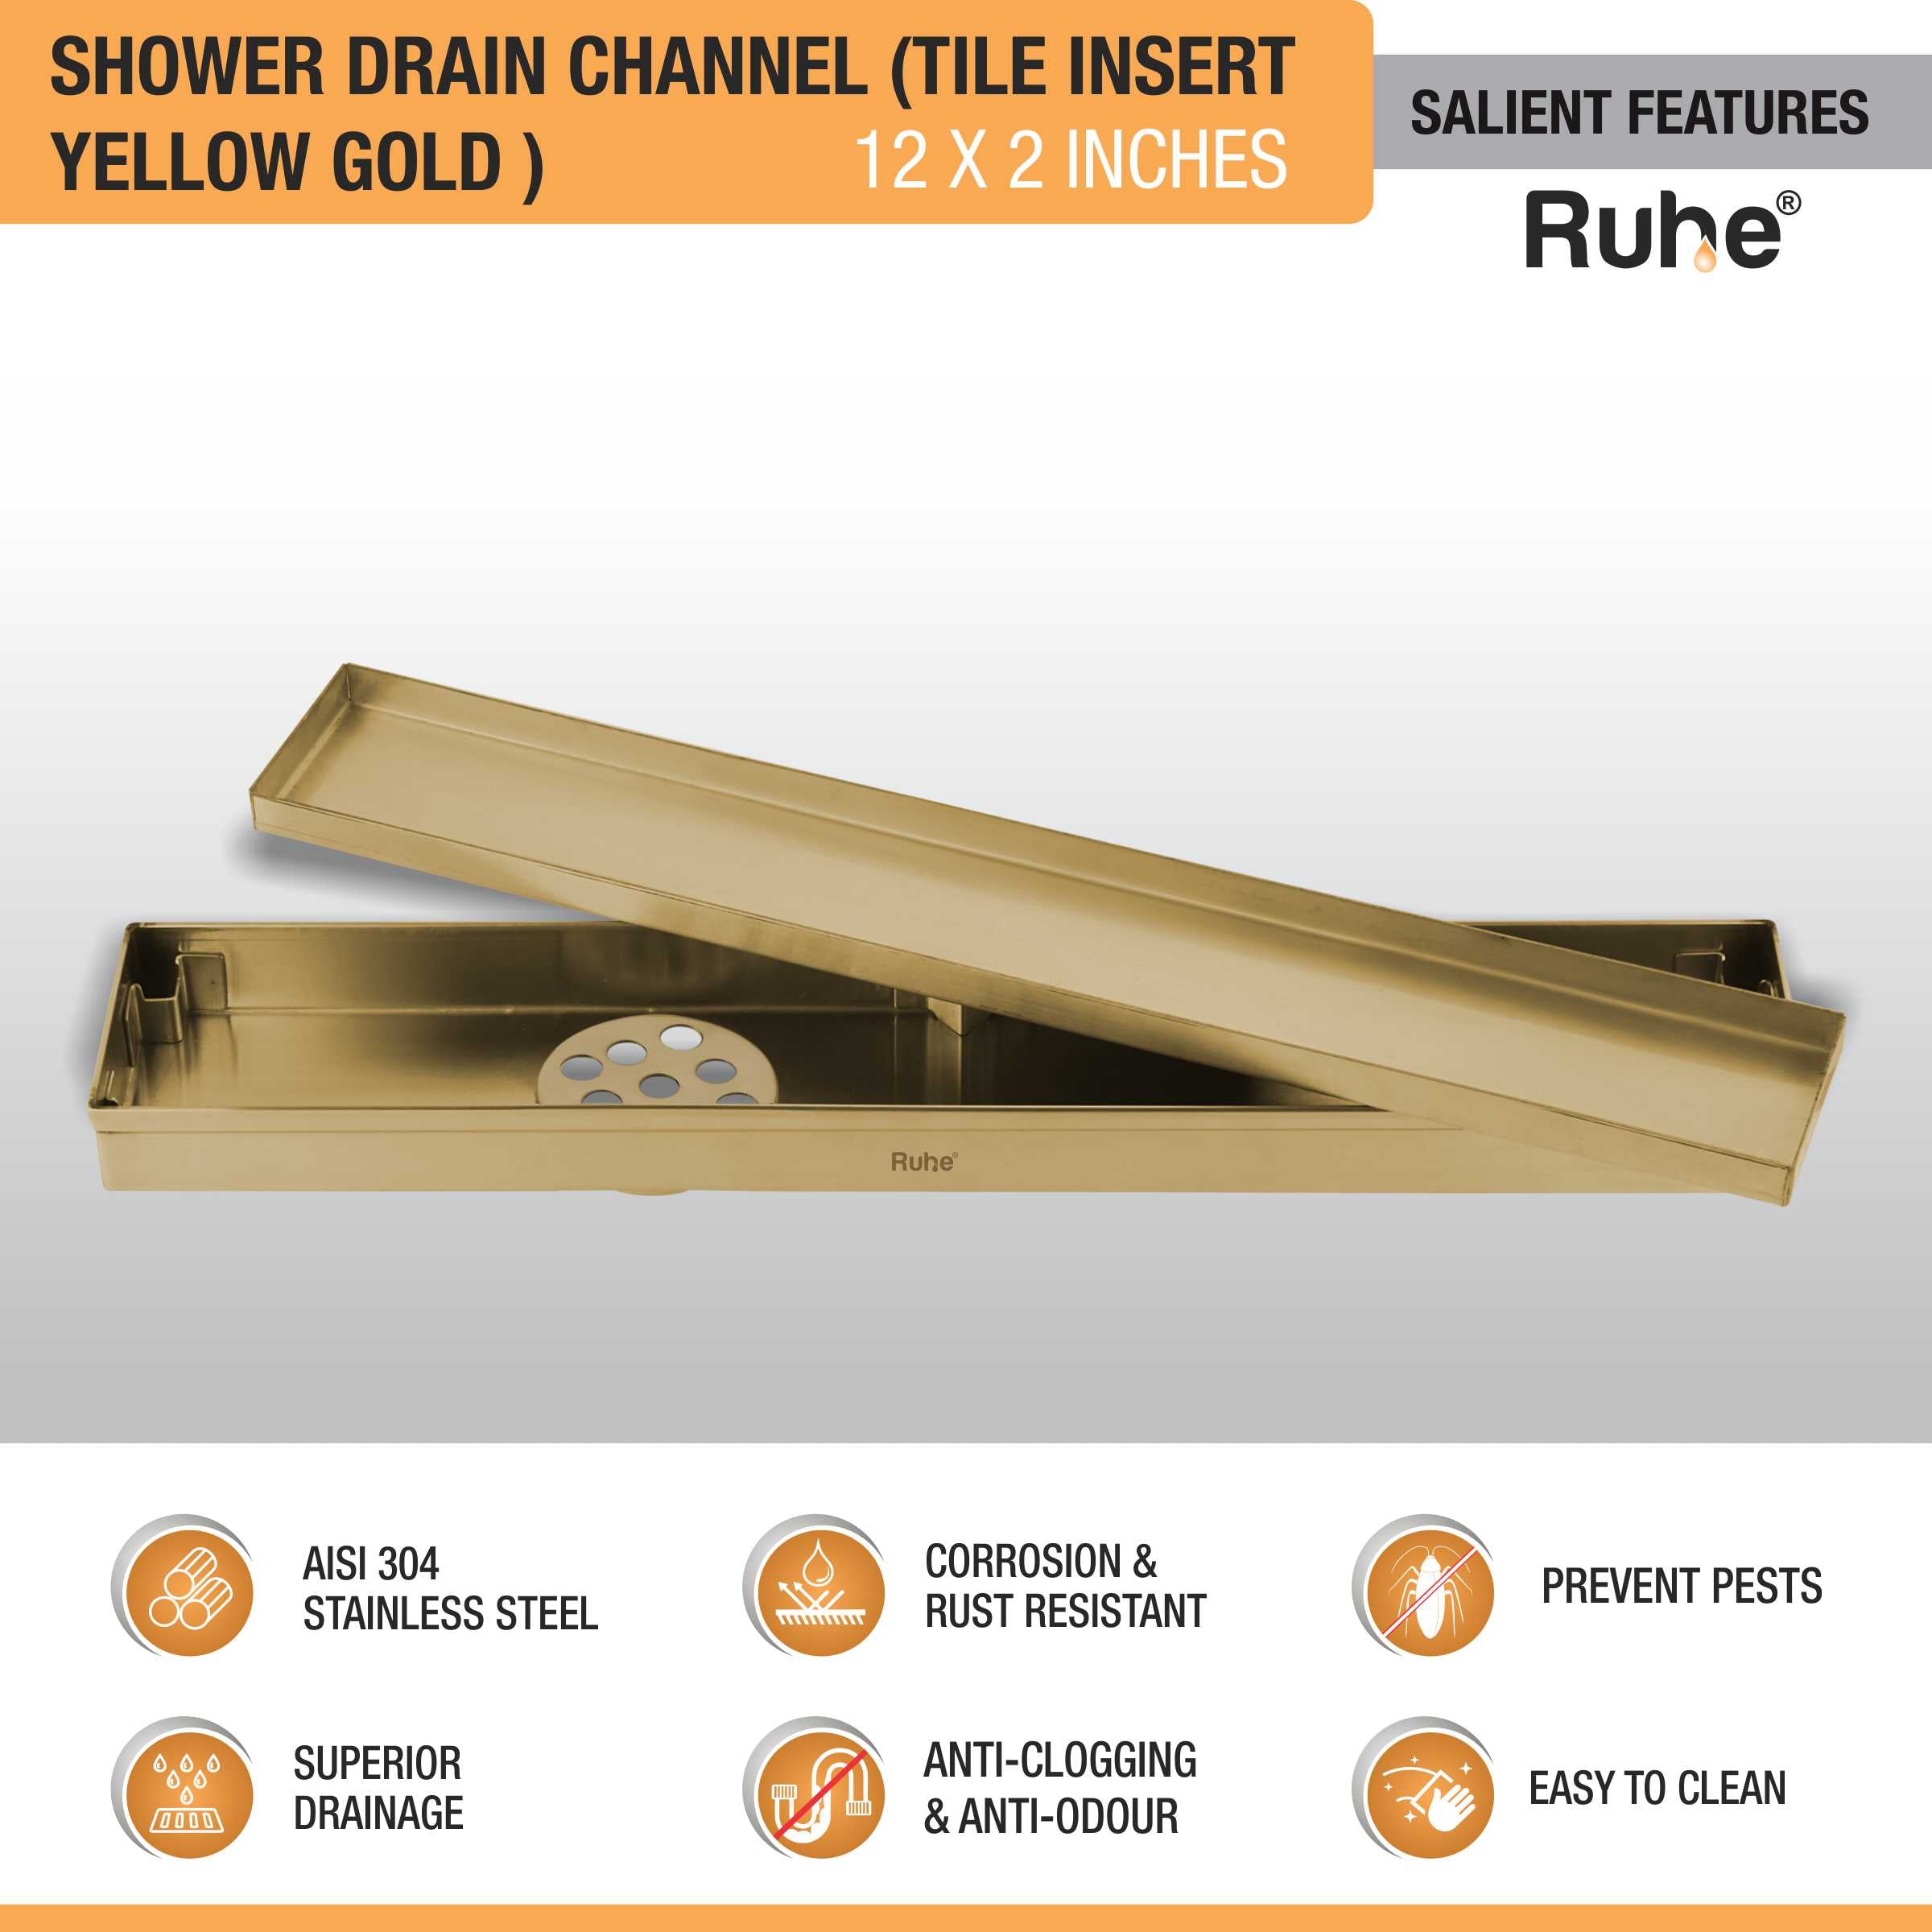 Tile Insert Shower Drain Channel (12 x 2 Inches) YELLOW GOLD features